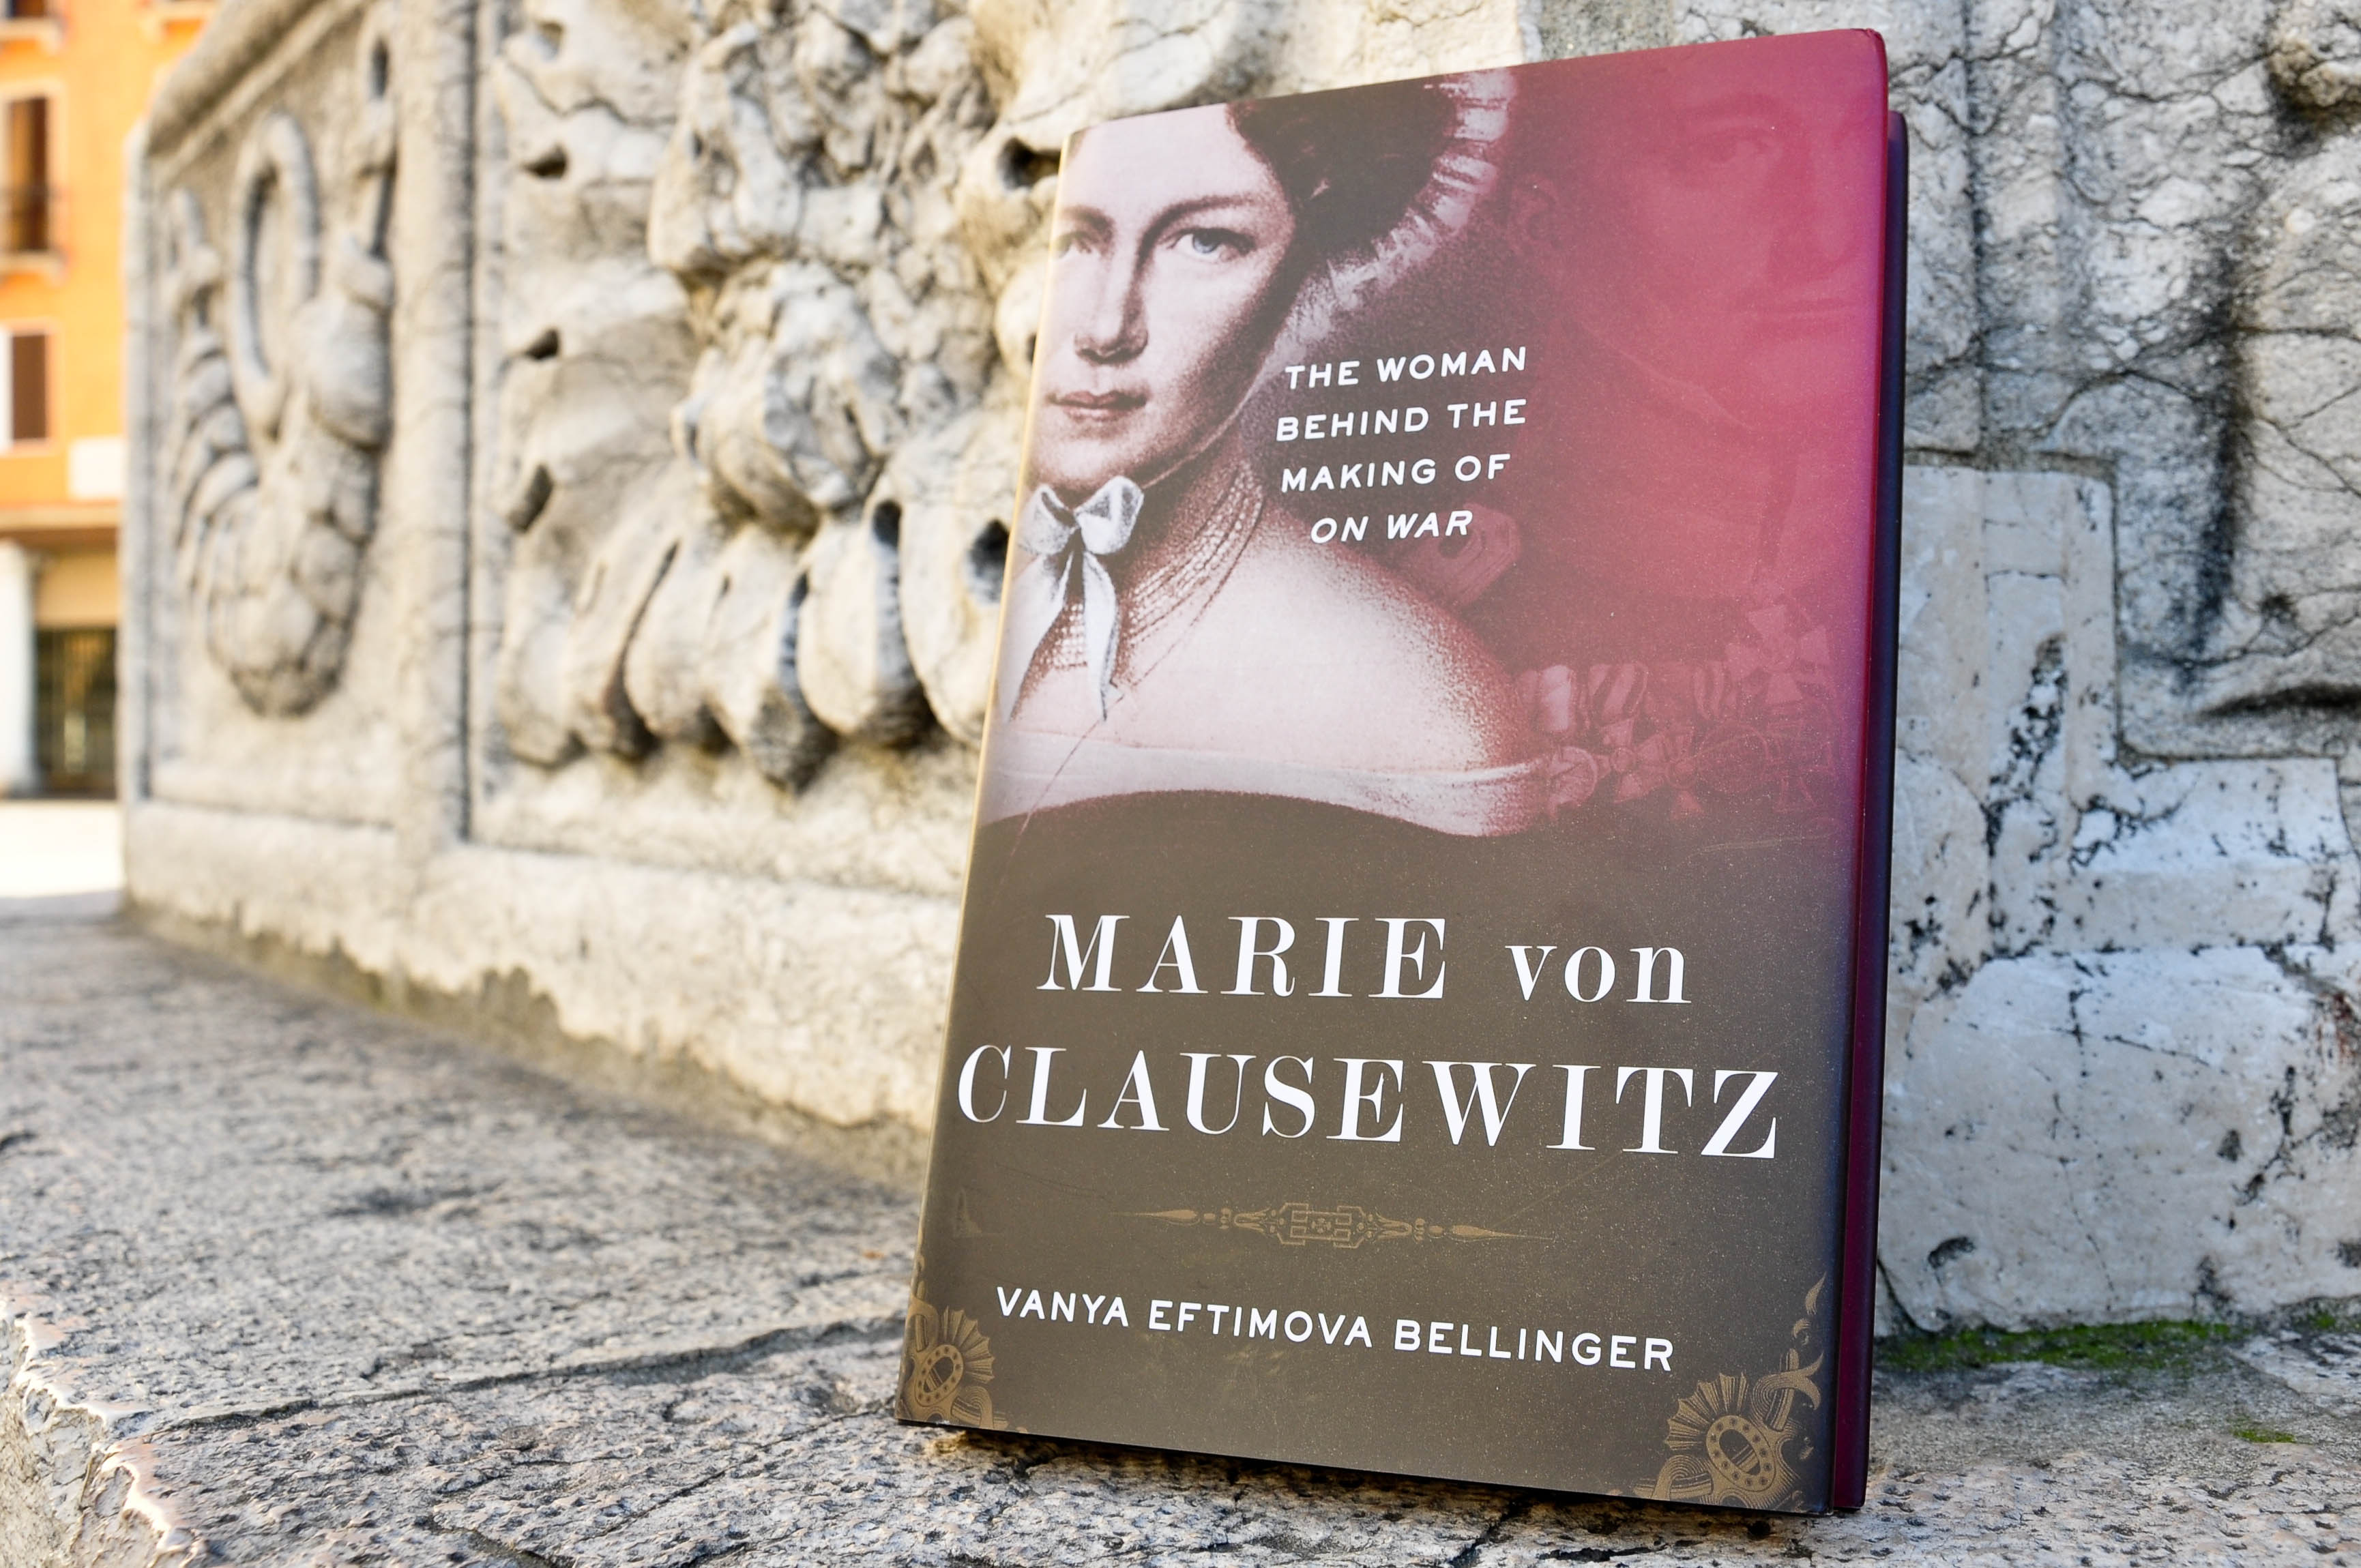 'Marie von Clausewitz: The Woman Behind the Making of On War' by Vanya Eftimova Bellinger, Vicenza, Italy-5